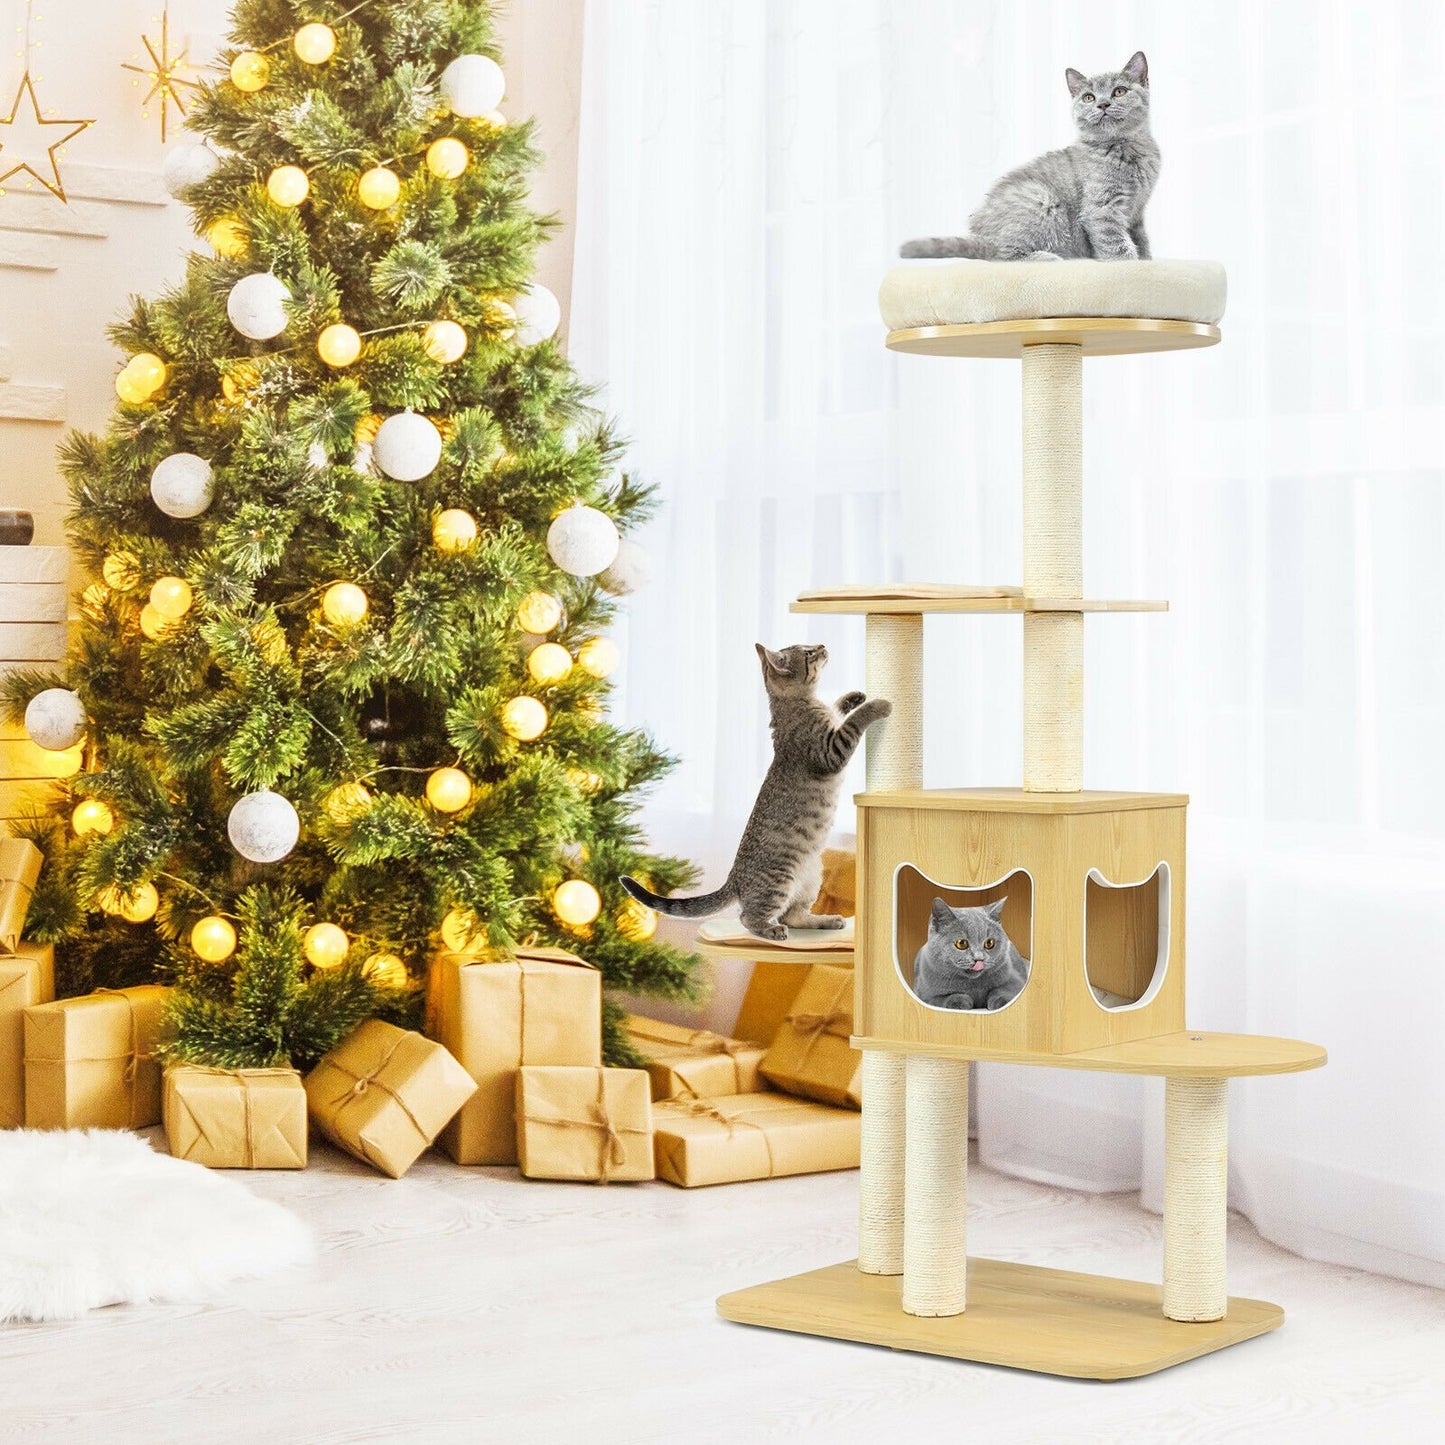 4 Levels Modern Wood Cat Tower with Washable Mats, Walnut